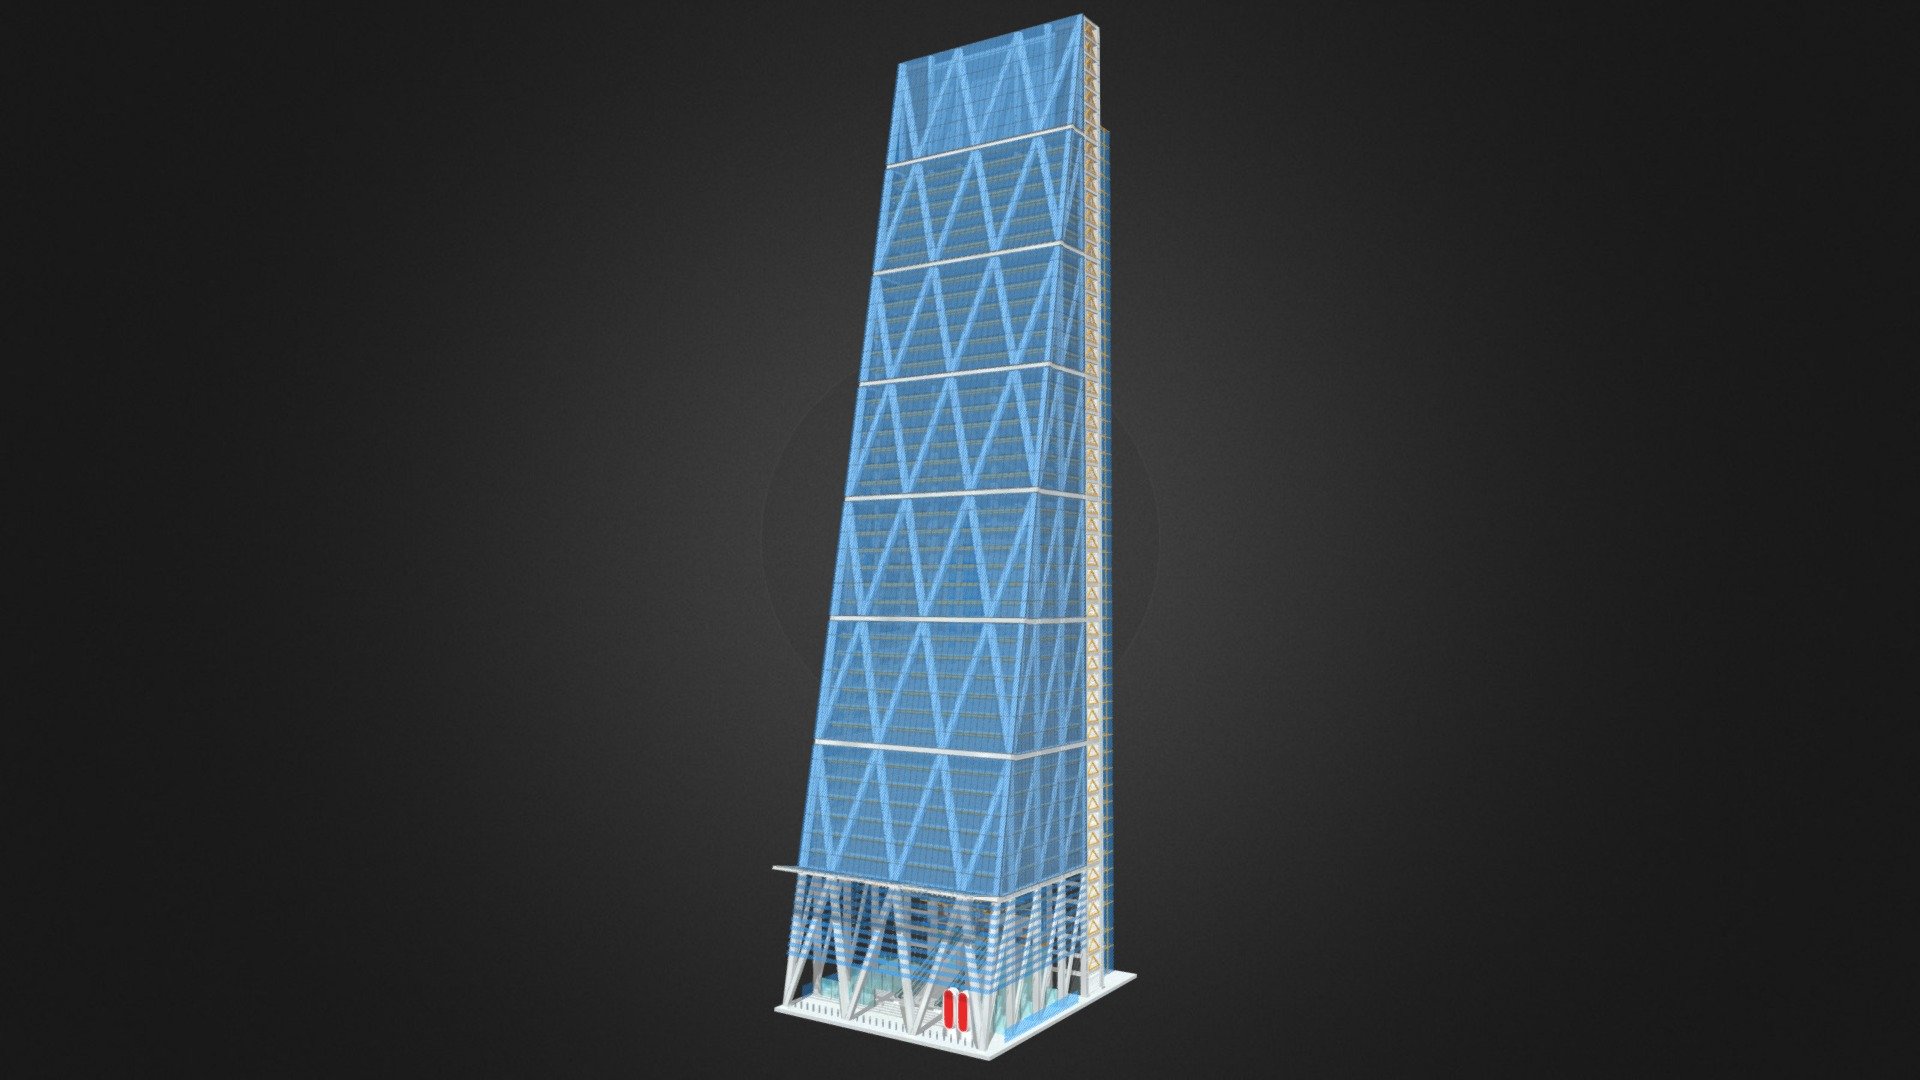 The Leadenhall Building London
High Detailed The Leadenhall Building 3d model.
Originally created with 3ds Max 2015 and rendered in Vray Also Include mental Ray file with render setup

Poly Count = 141642
VertexCount =  157136

Leadenhall_building_3d_model #skyscraper #tower #city #architecture #London #uk #London_eye #landmark #england #united_kingdom #oxford - The Leadenhall Building London - 3D model by nuralam018 3d model